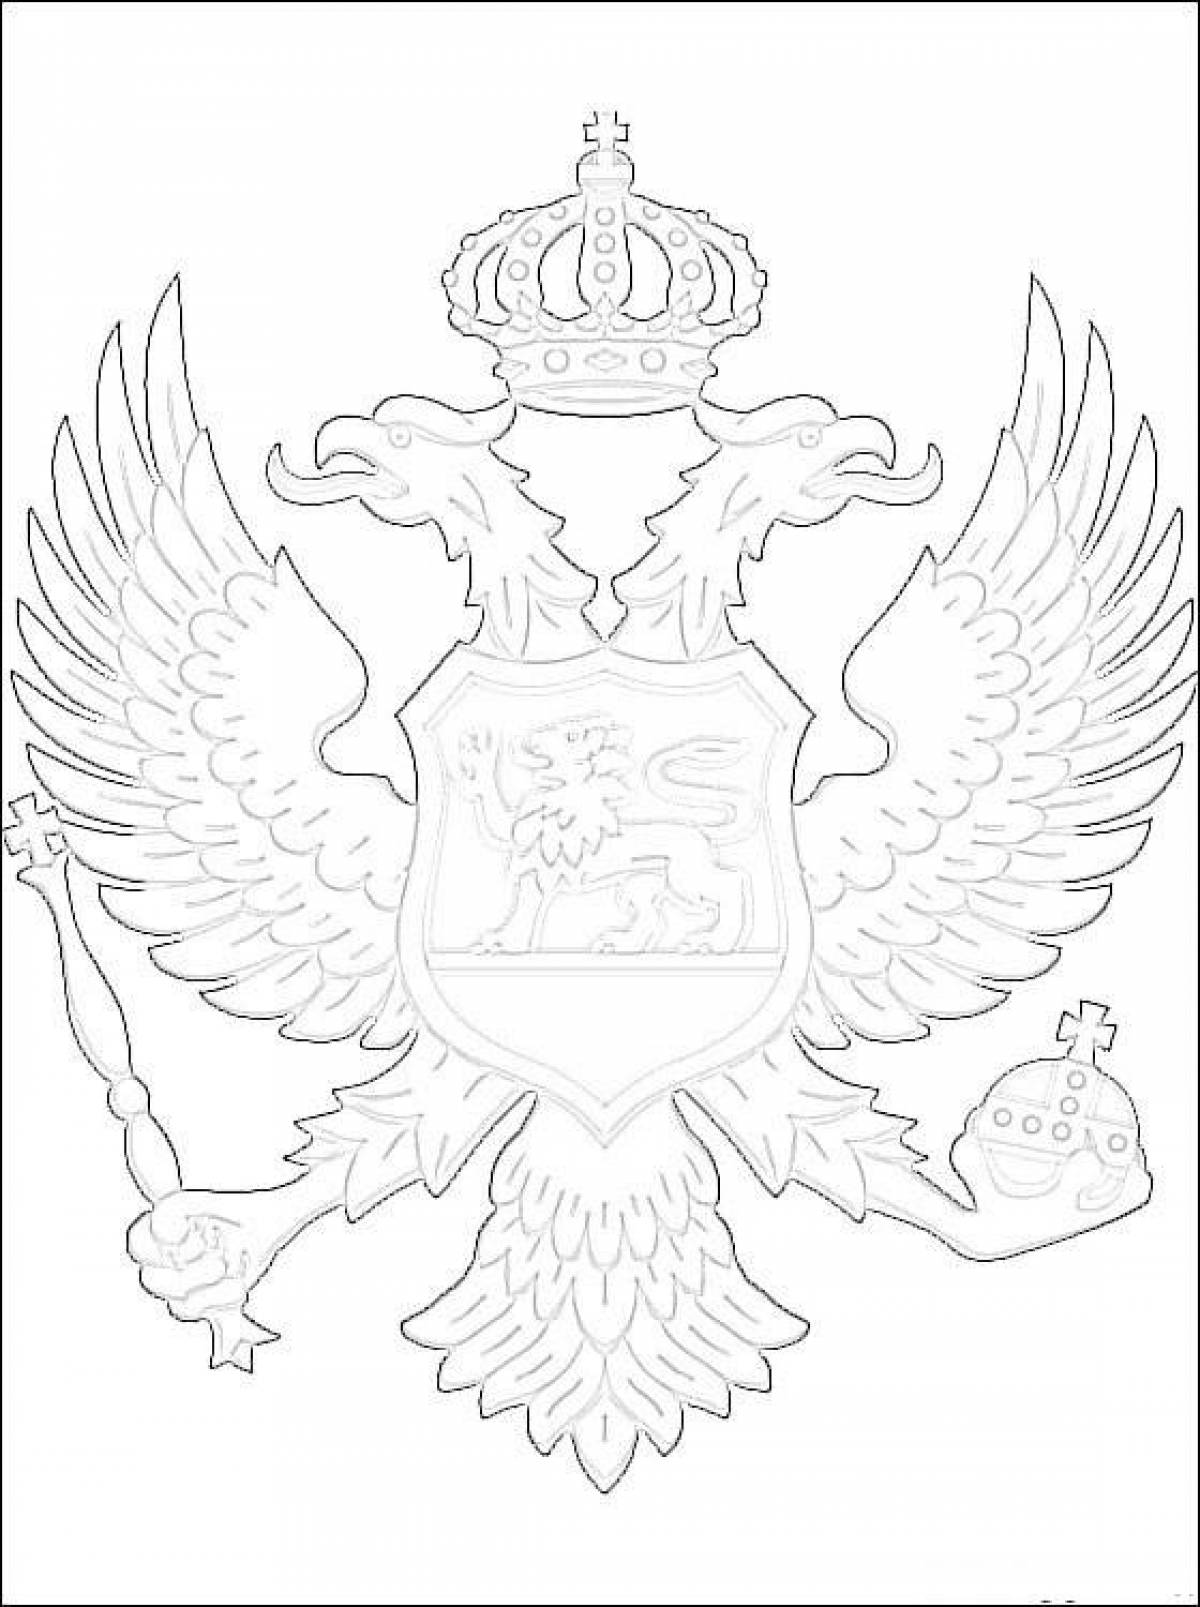 Coat of arms of Russia #5